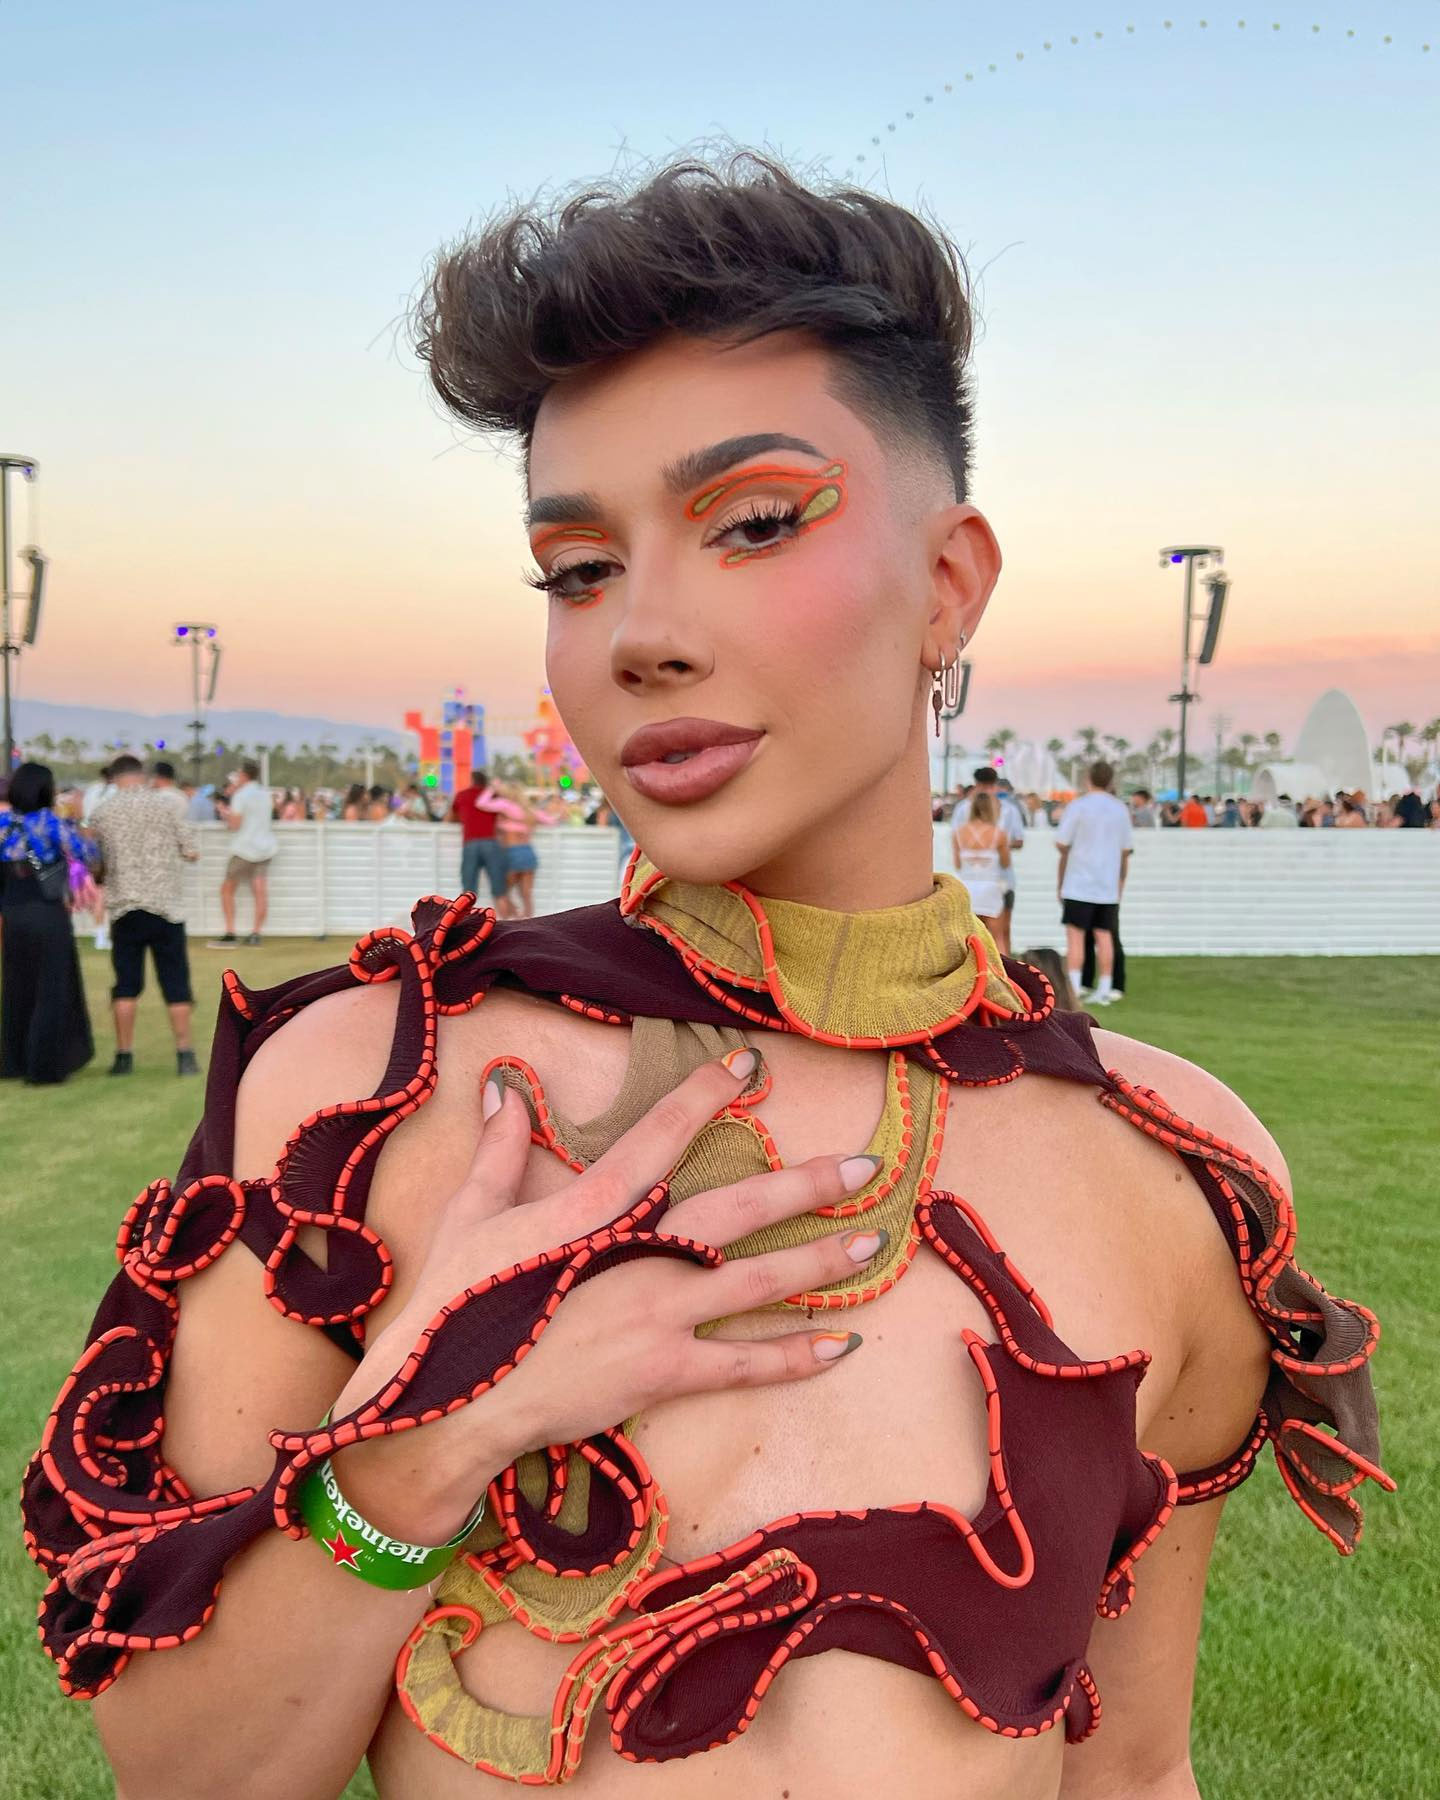 James Charles Stars Take Over the 1st Weekend of Coachella 2022